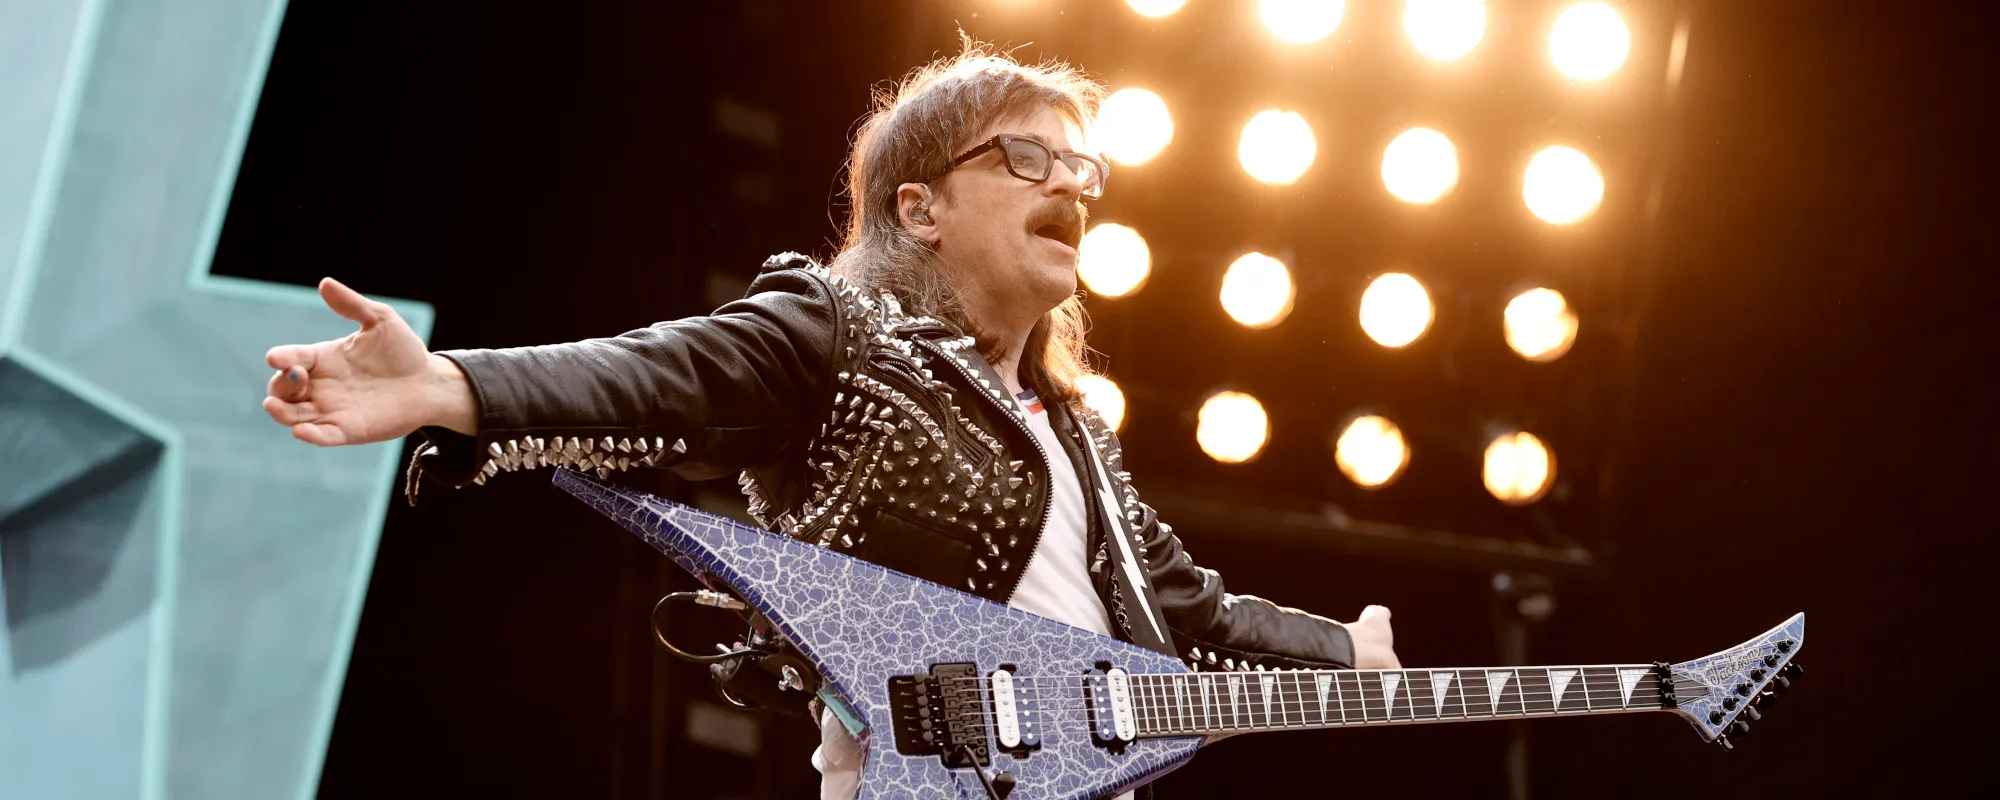 The Meaning Behind “Undone – The Sweater Song” by Weezer and How a College Professor Unwittingly Helped Write It